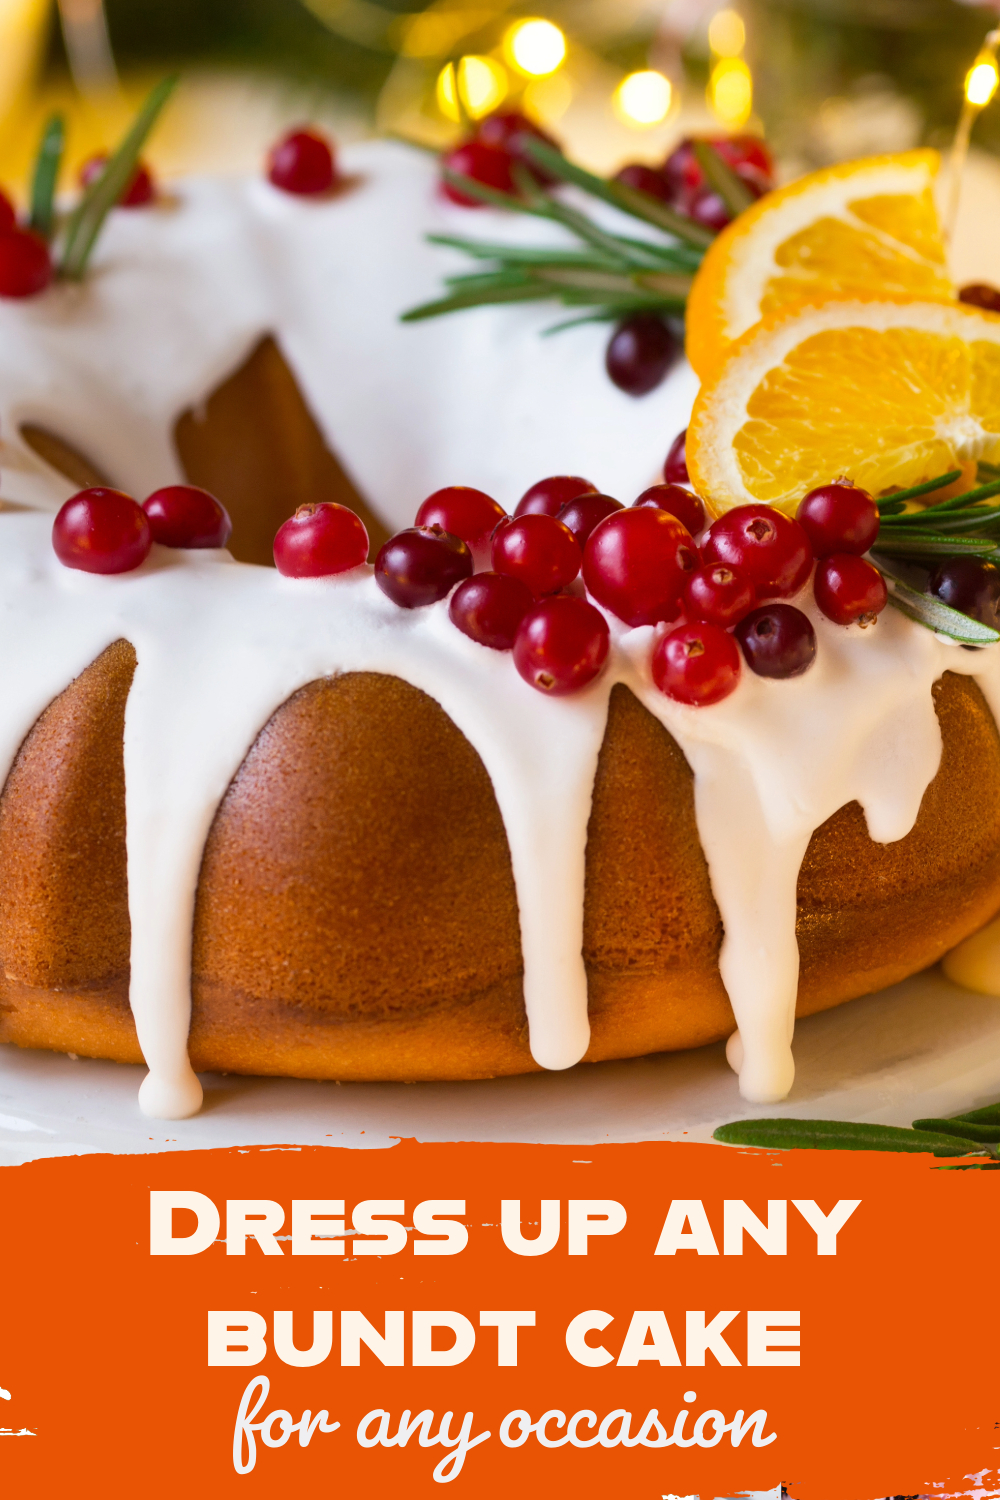 Dress Up Bundt Cake For Any Occasion